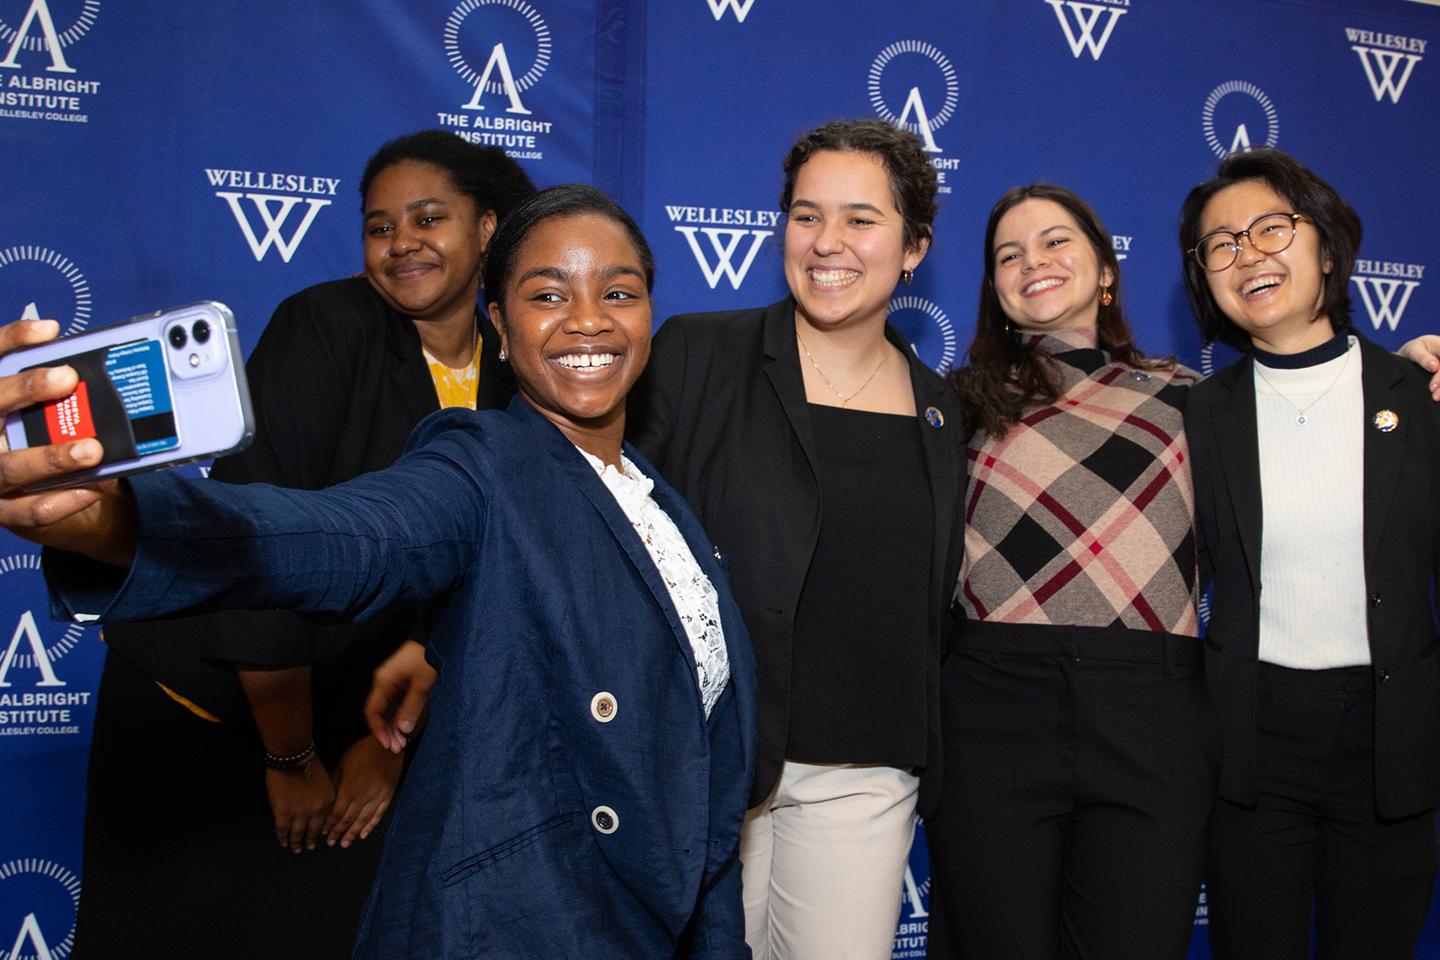 Five students pose for a selfie in front of the Albright Institute drop cloth background.